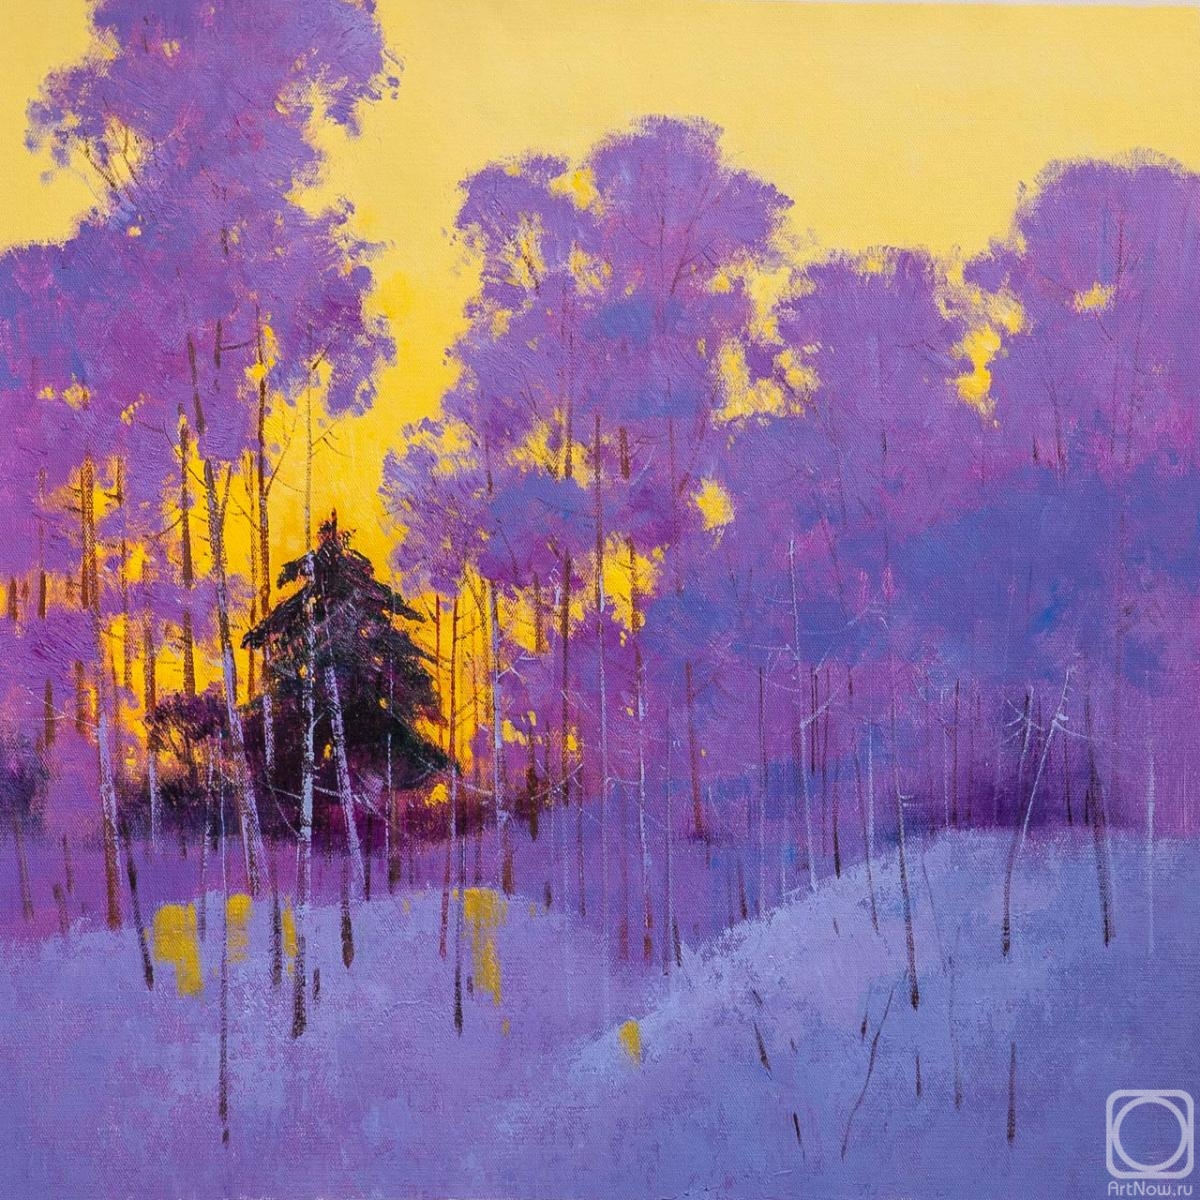 Gomes Liya. Golden sunset in the forest